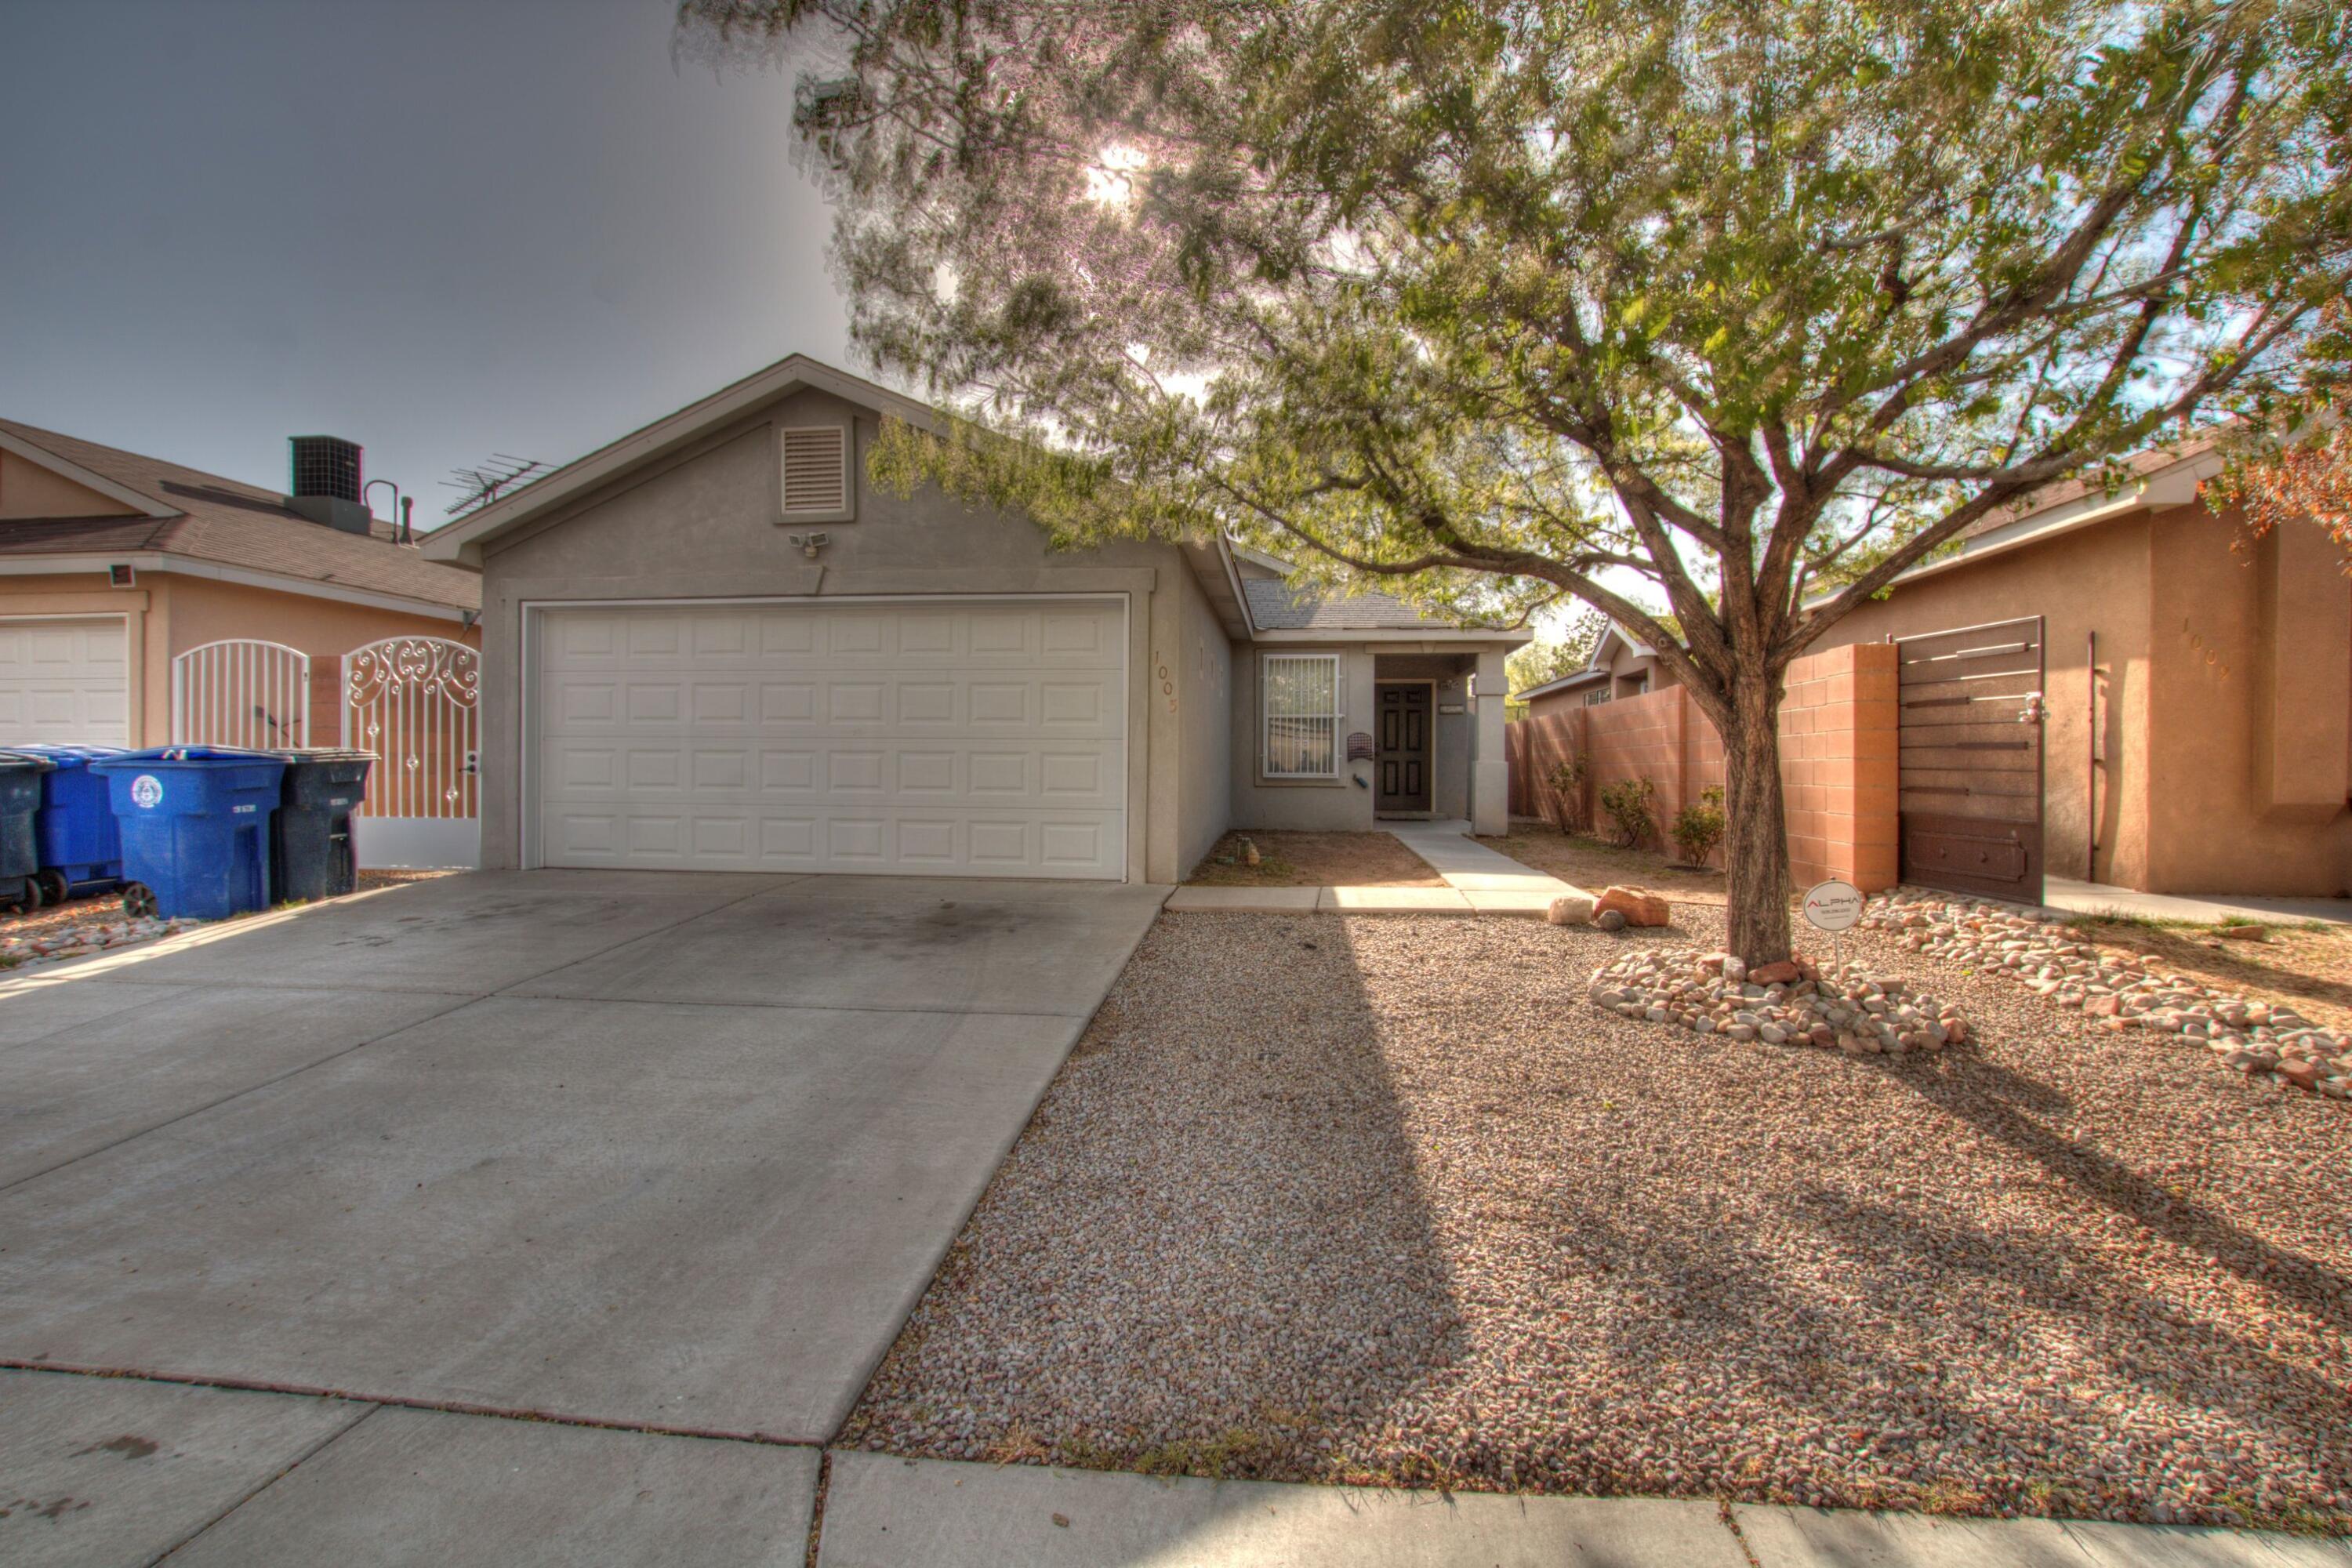 1005 72Nd Place NW, Albuquerque, NM 87121